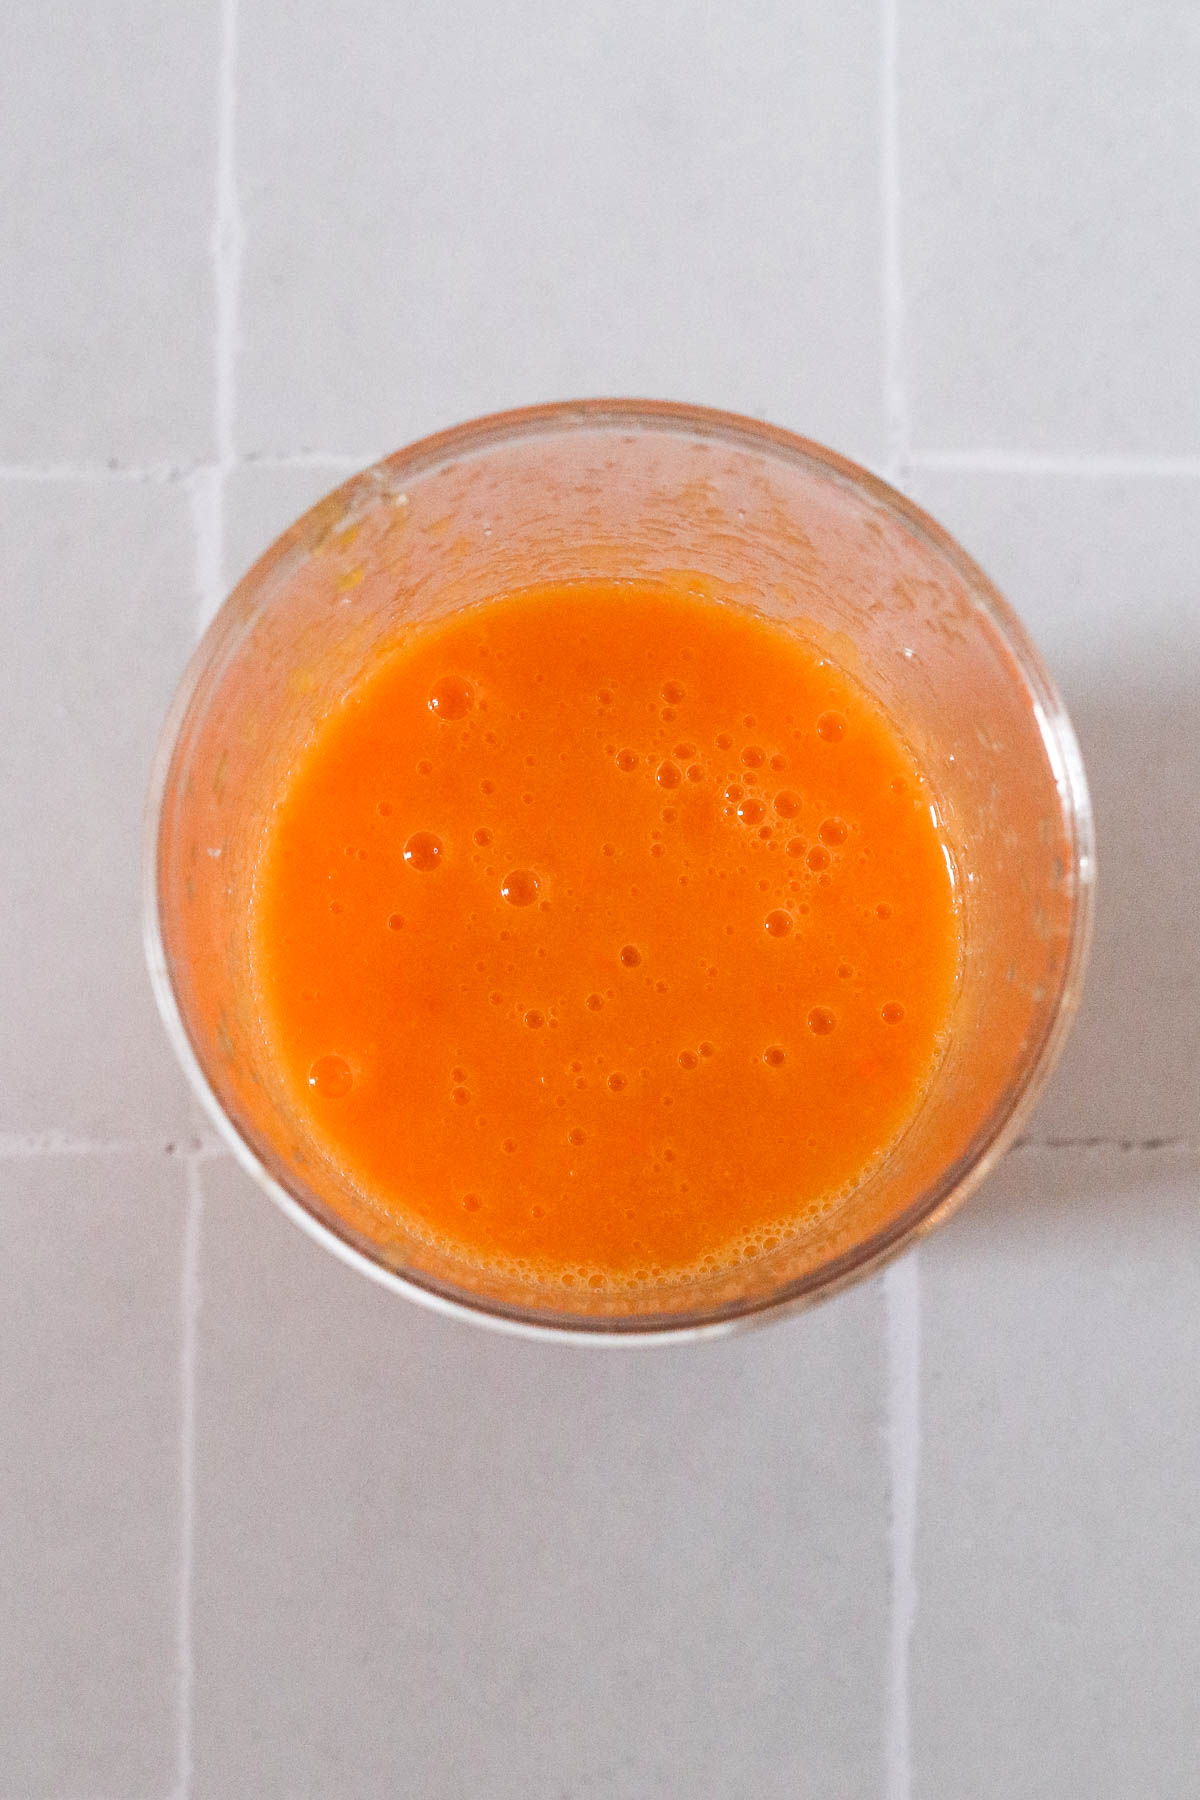 blended hot sauce in a cup.